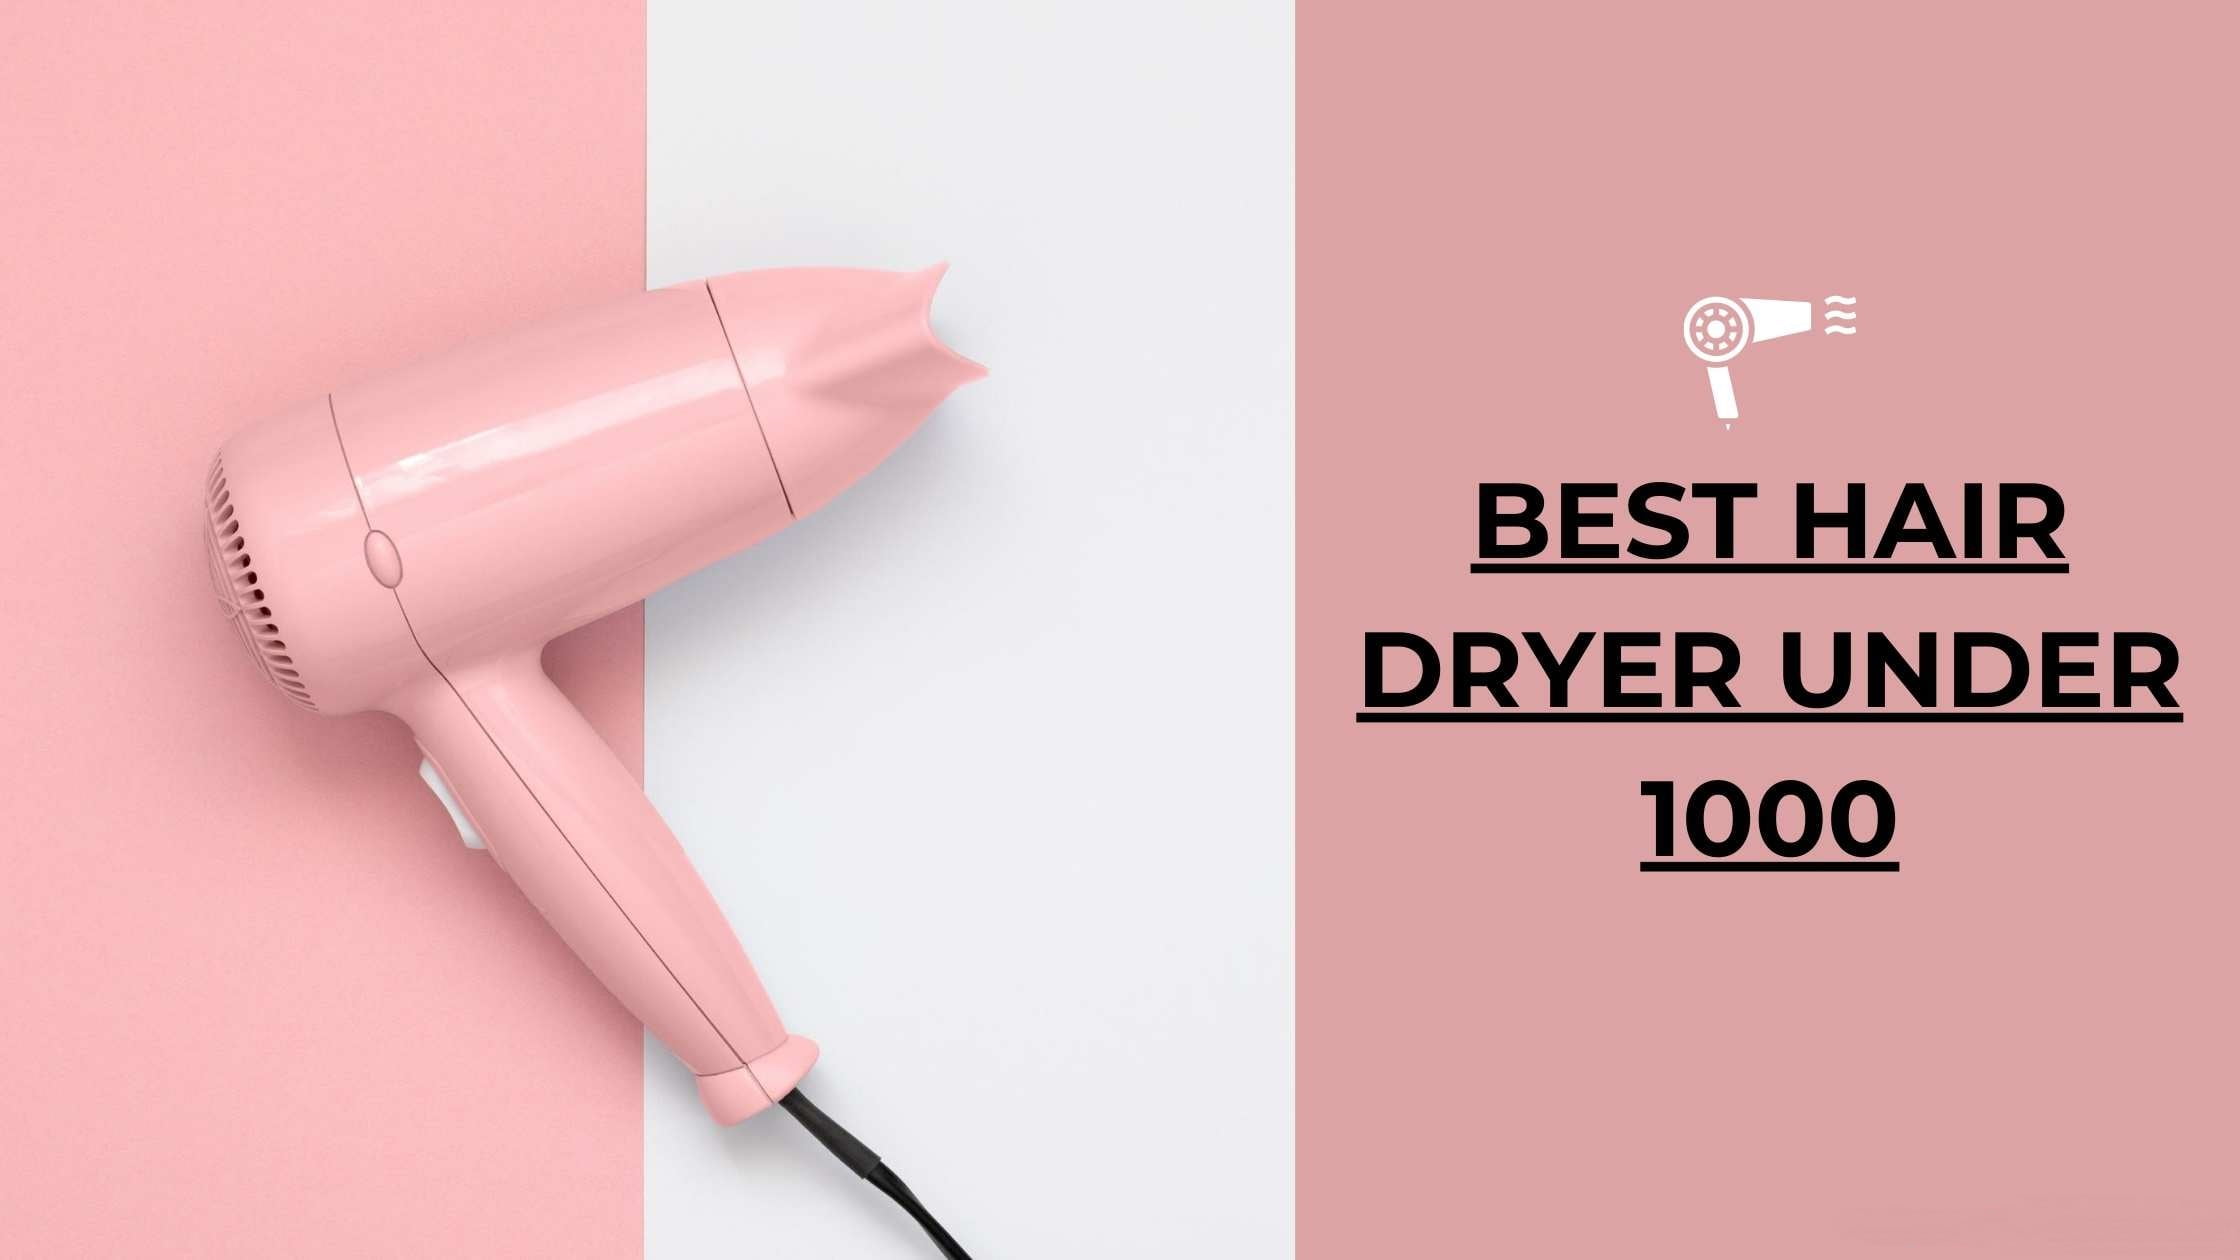 Hairdryers Under 1000 || Blow Dry Your Hair Like a Pro with these Dryers